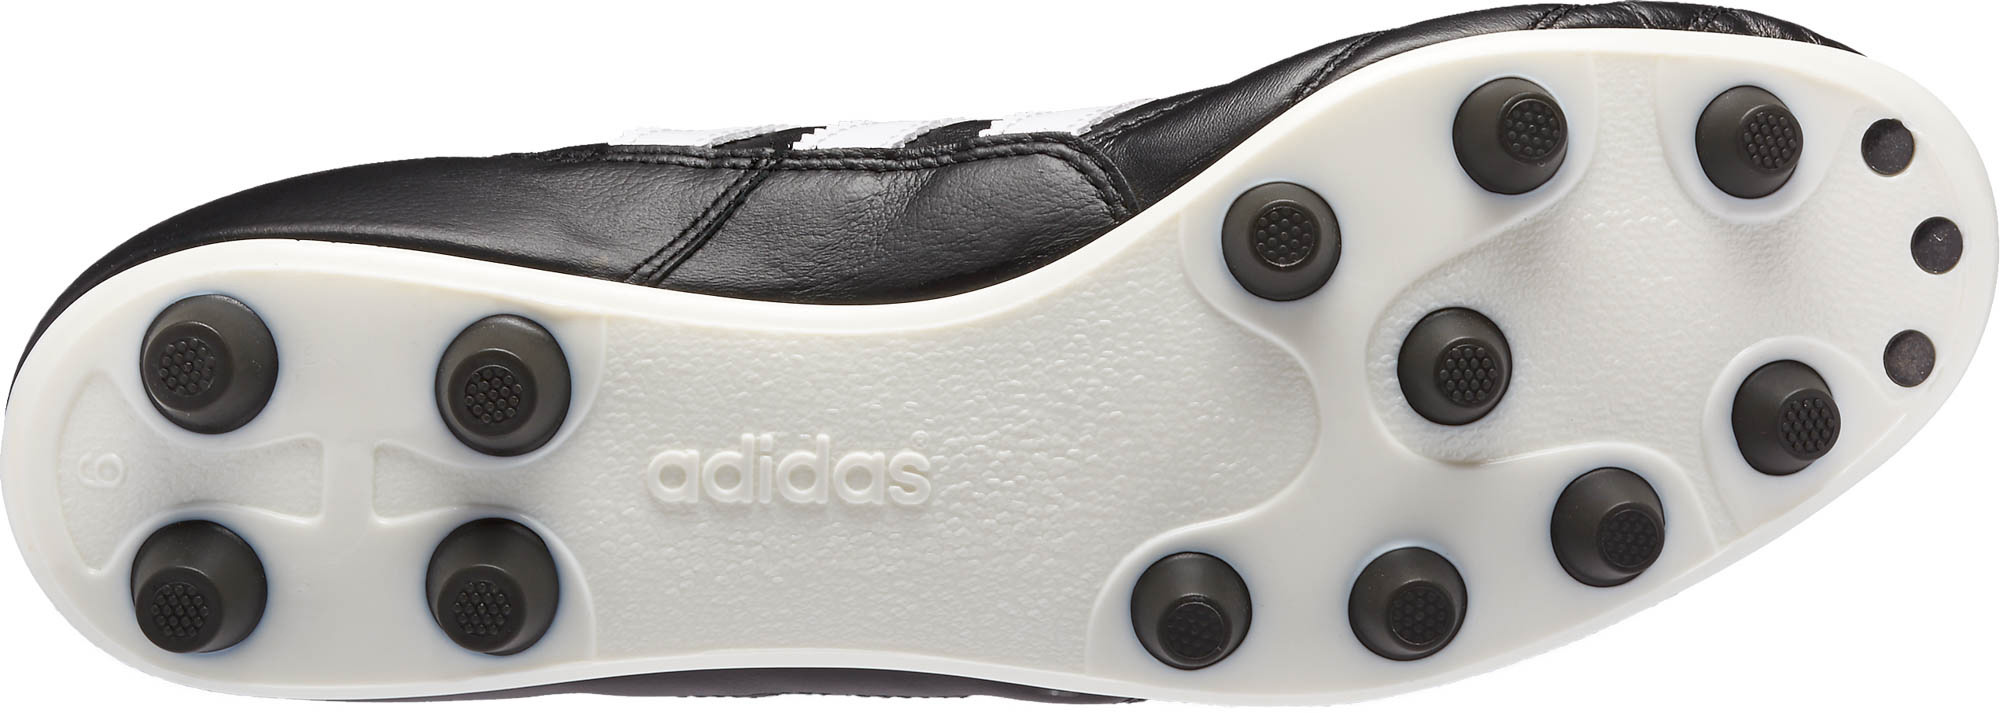 adidas copa mundial youth soccer shoes